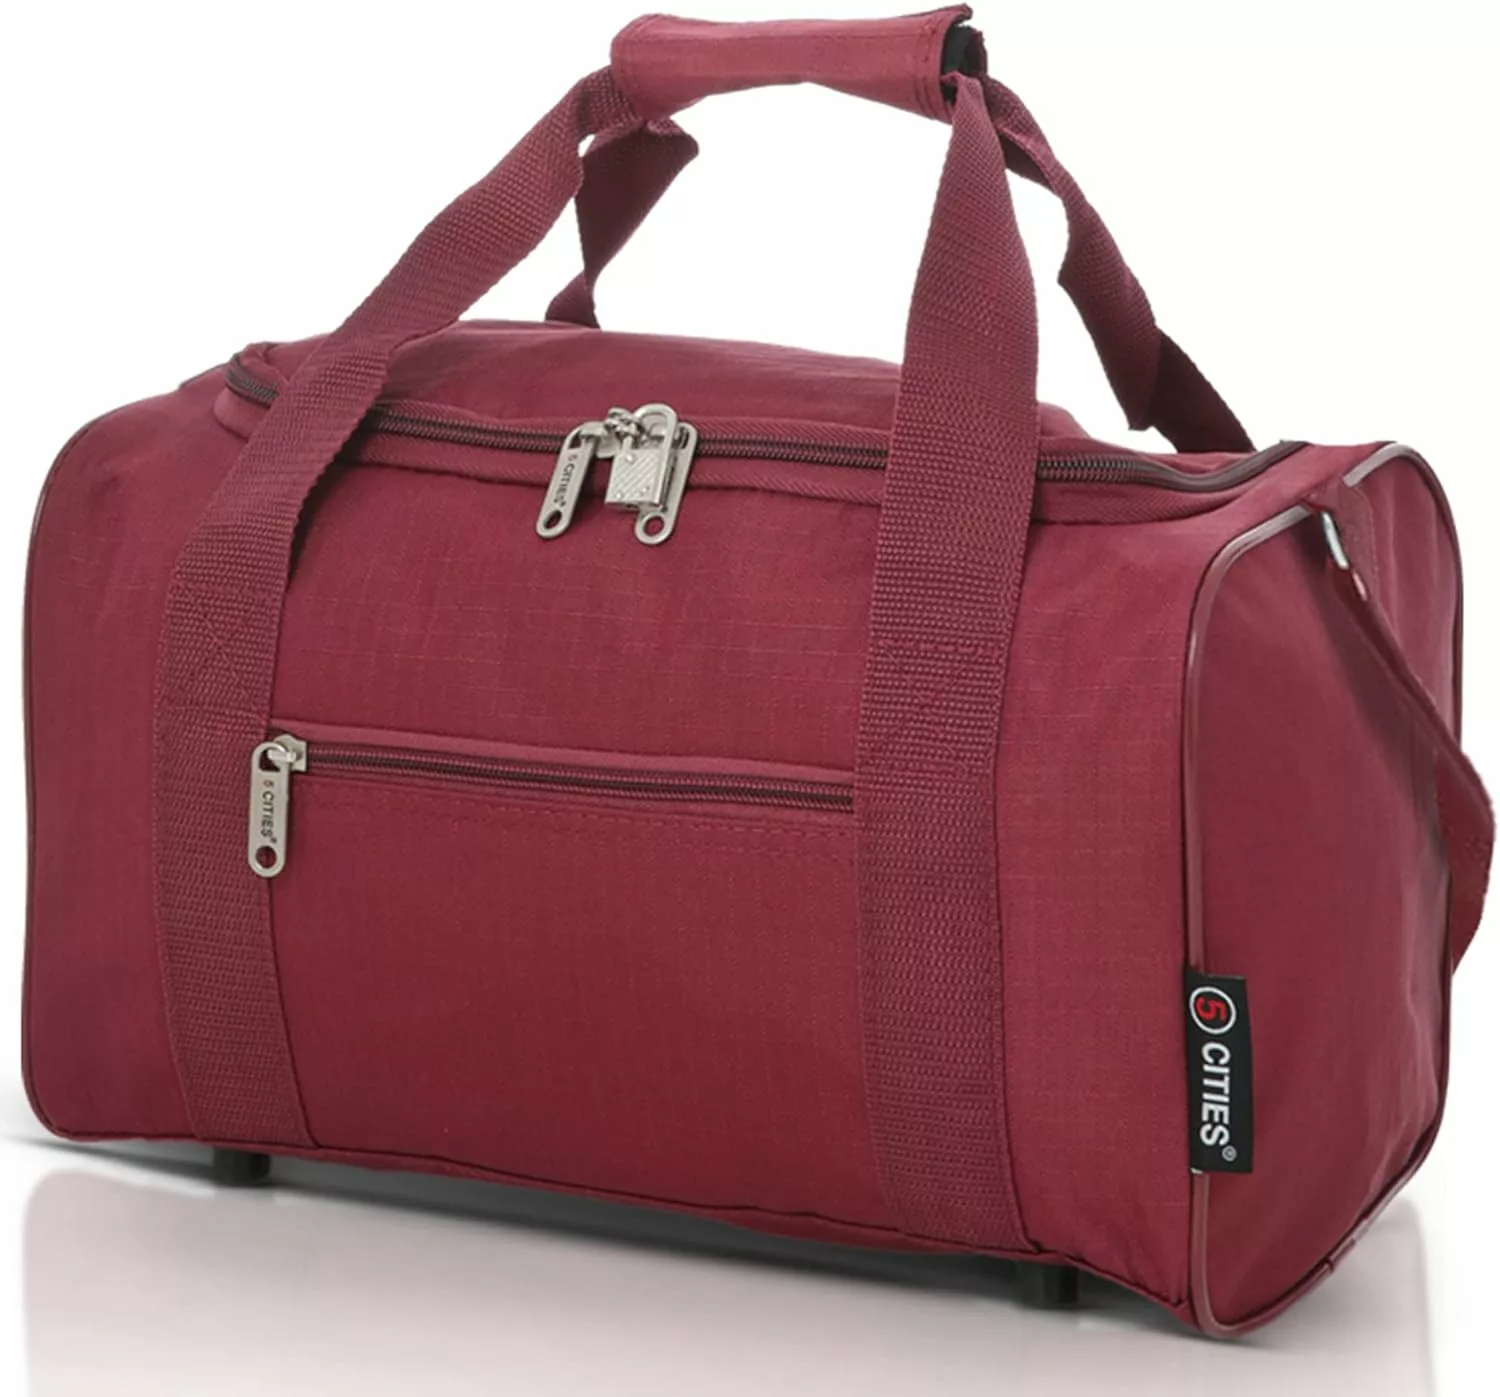 5 Cities 40x20x25 Ryanair Maximum Sized Travel Carry On Under Seat Cabin Holdall Lightweight – Take The Max on Board! with 2 Year Warranty (Wine)